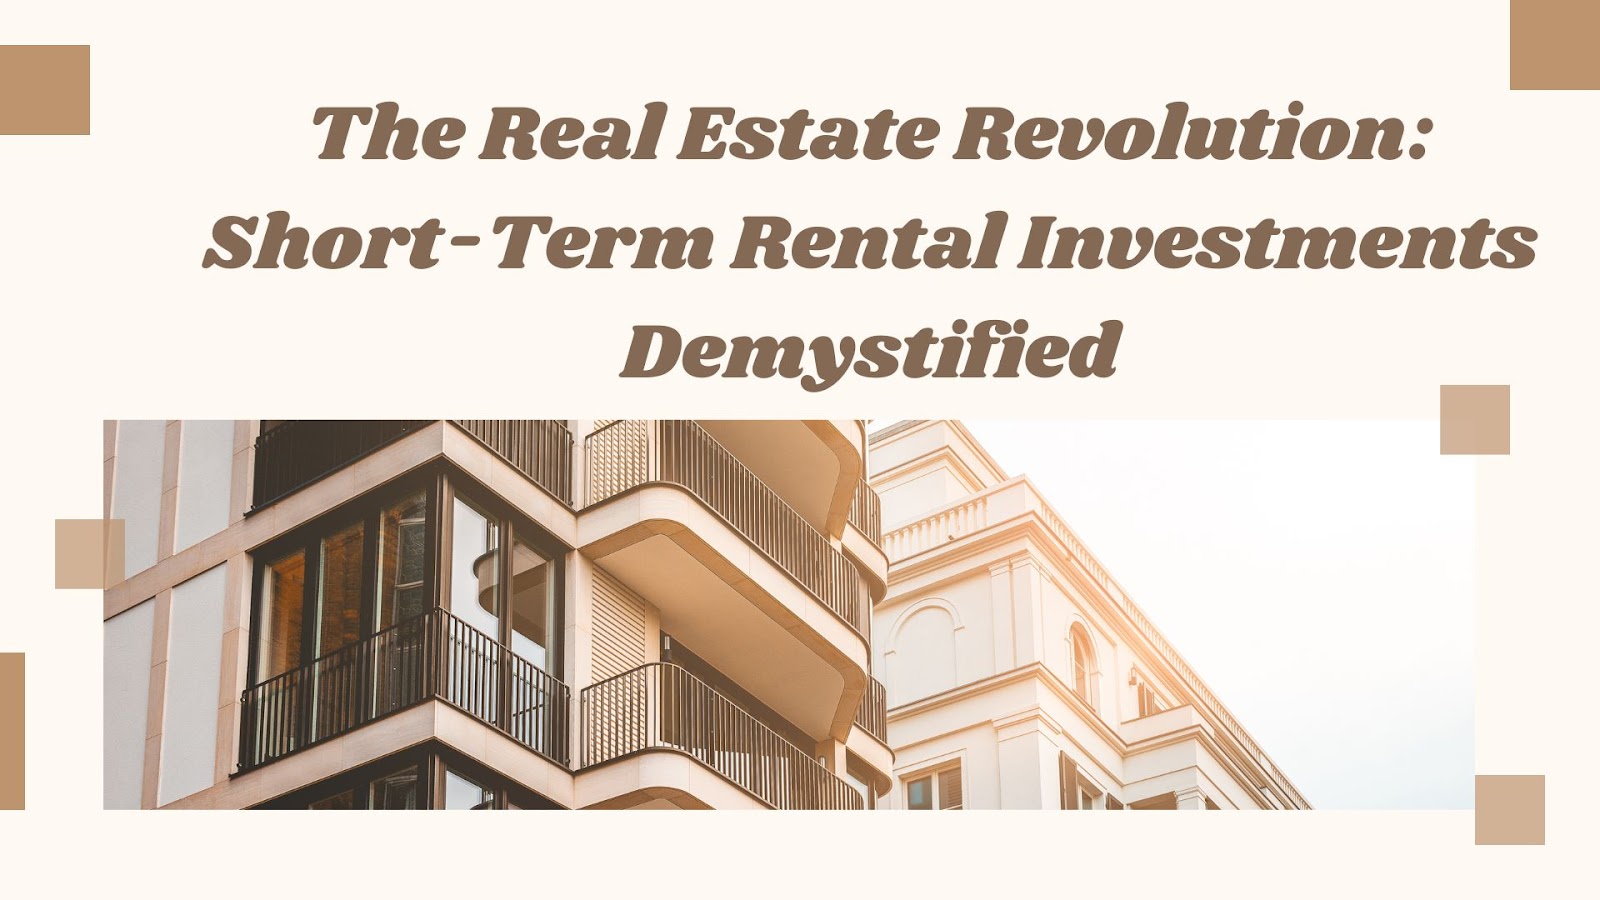 The Real Estate Revolution: Short-Term Rental Investments Demystified